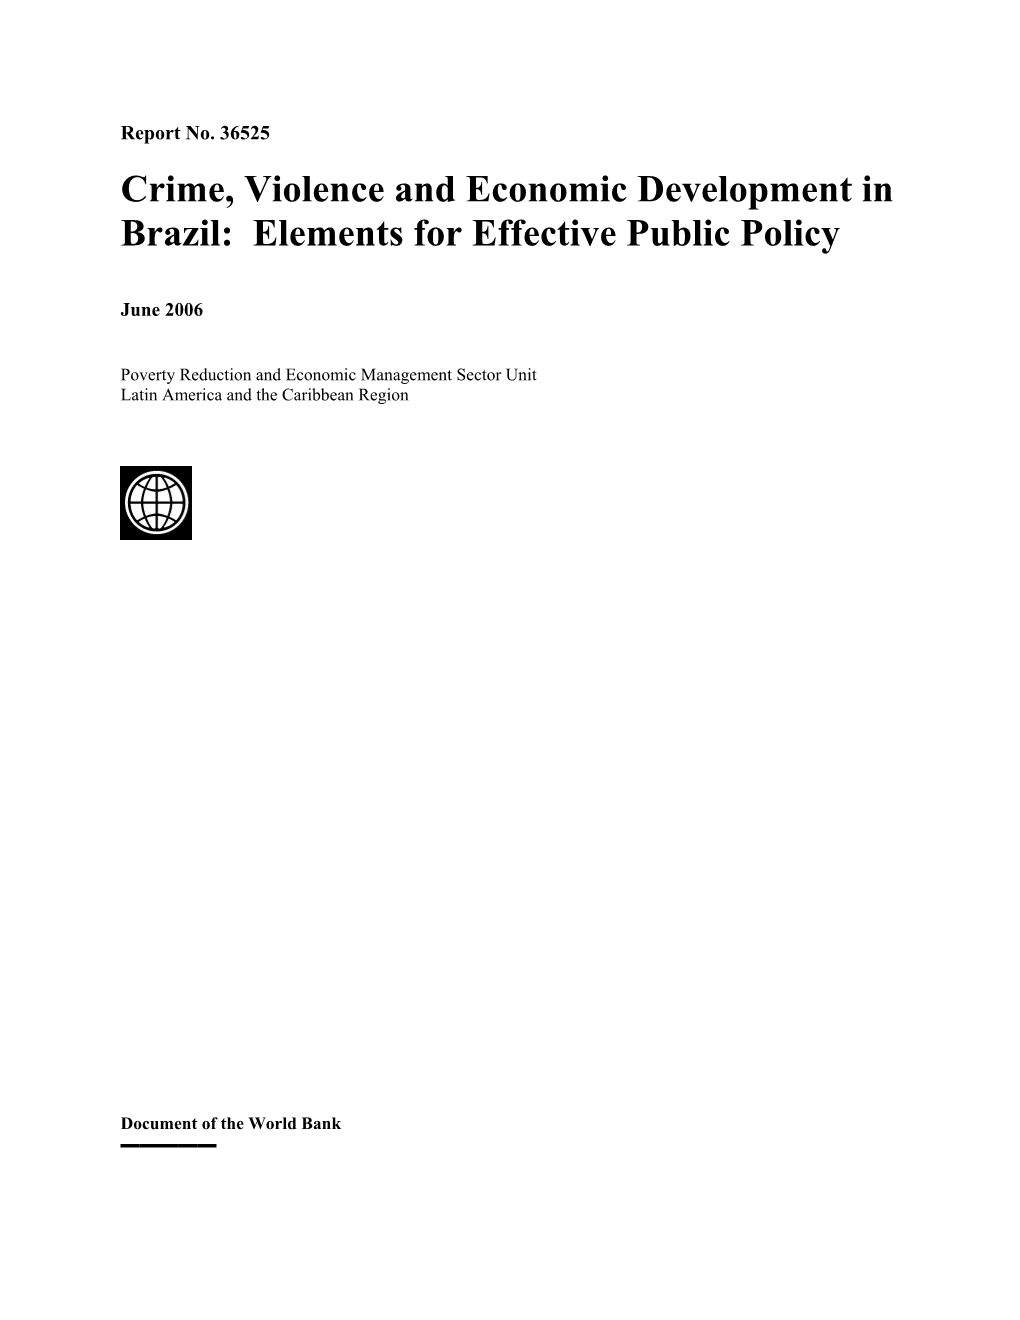 Crime, Violence and Economic Development in Brazil: Elements for Effective Public Policy